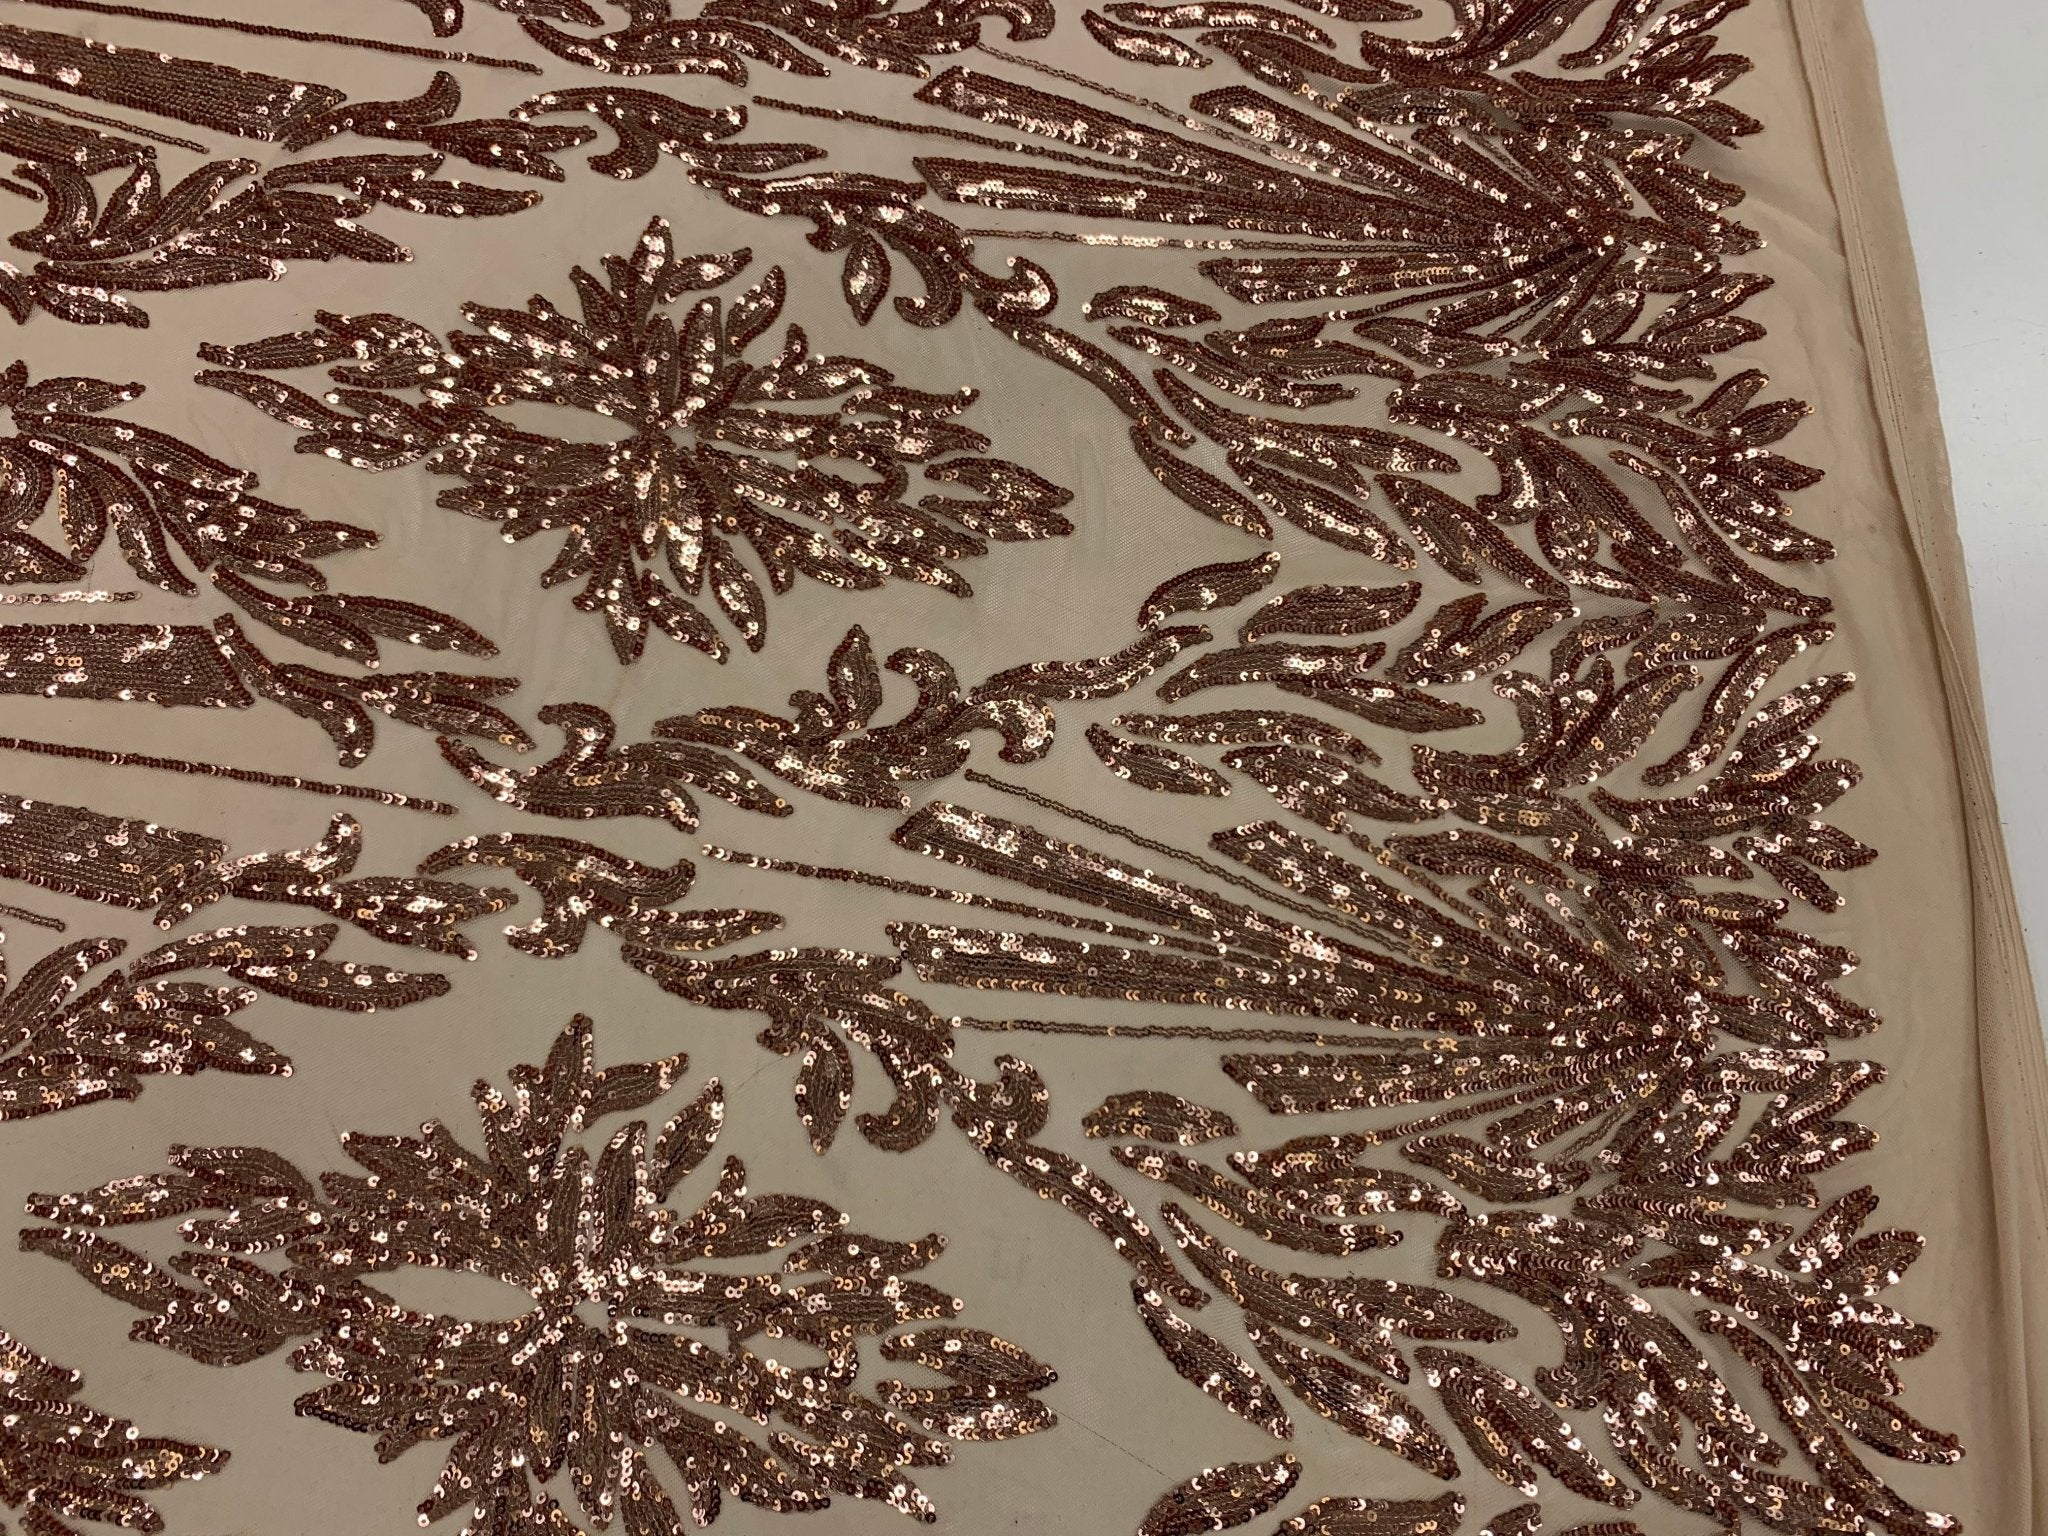 French Embroidery Stretch Sequins Fabric By The Yard on a Mesh LaceICEFABRICICE FABRICSRose GoldFrench Embroidery Stretch Sequins Fabric By The Yard on a Mesh Lace ICEFABRIC Rose Gold